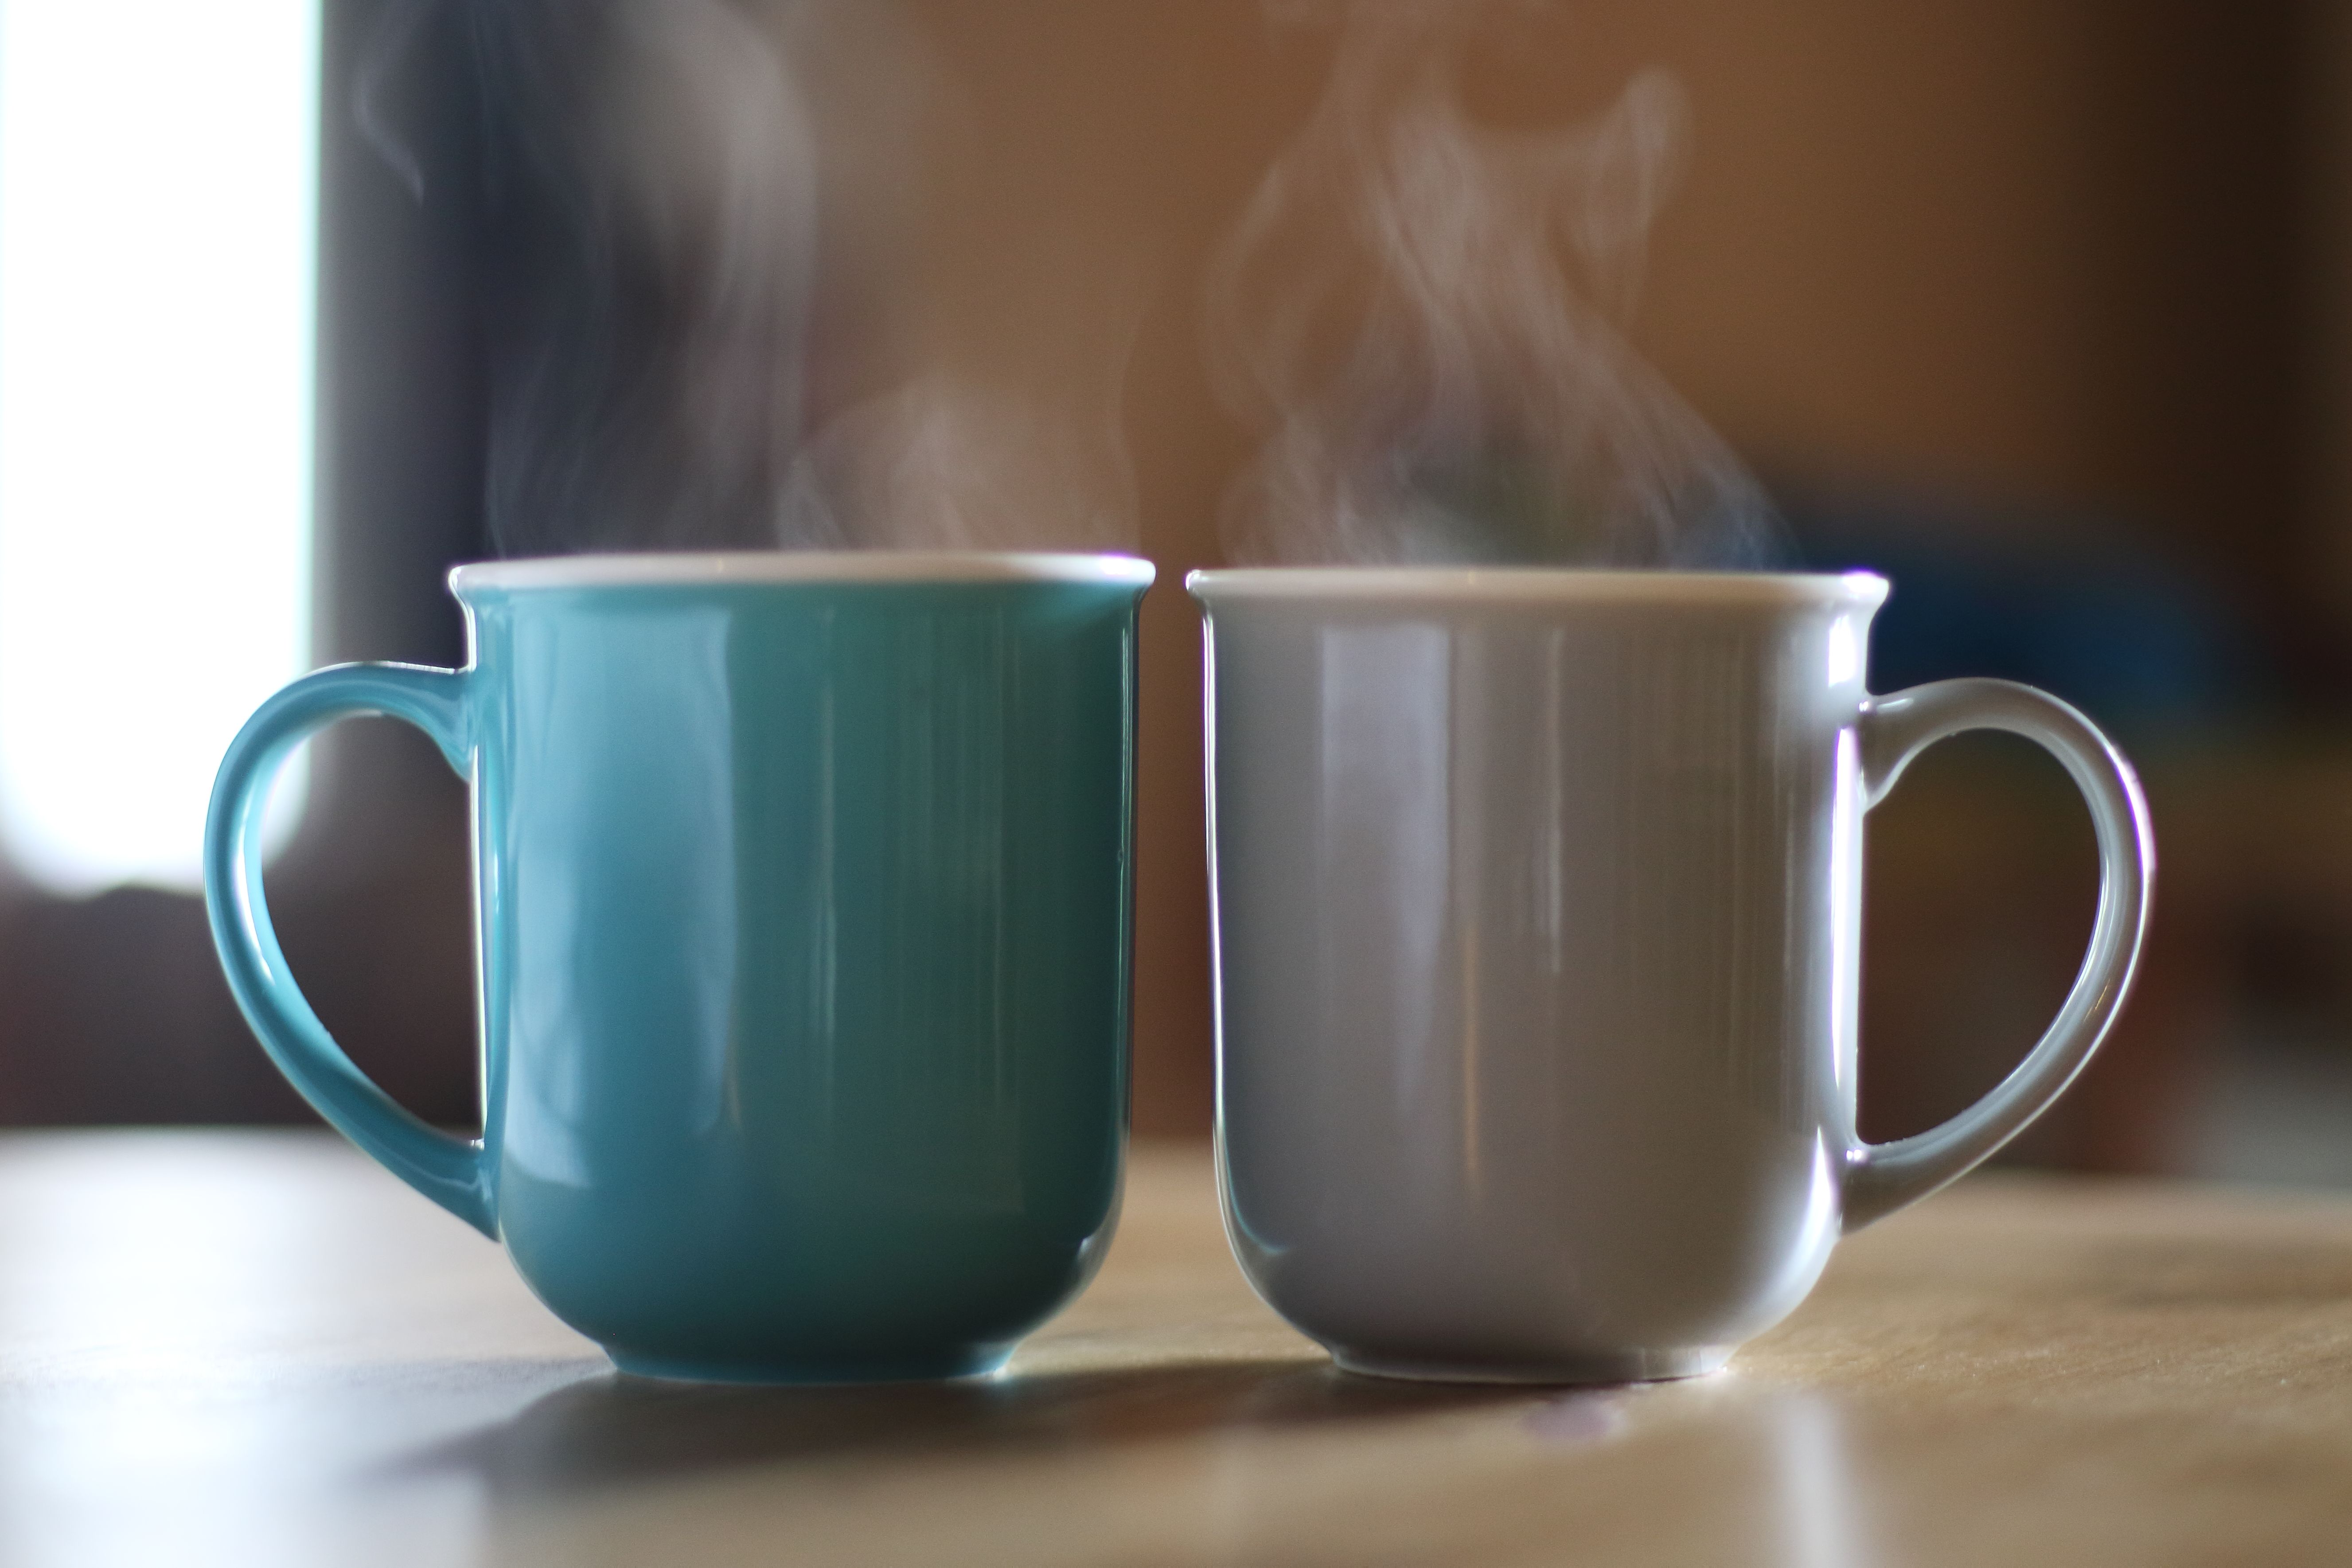 Two mugs with hot beverages inside. | Source: Getty Images